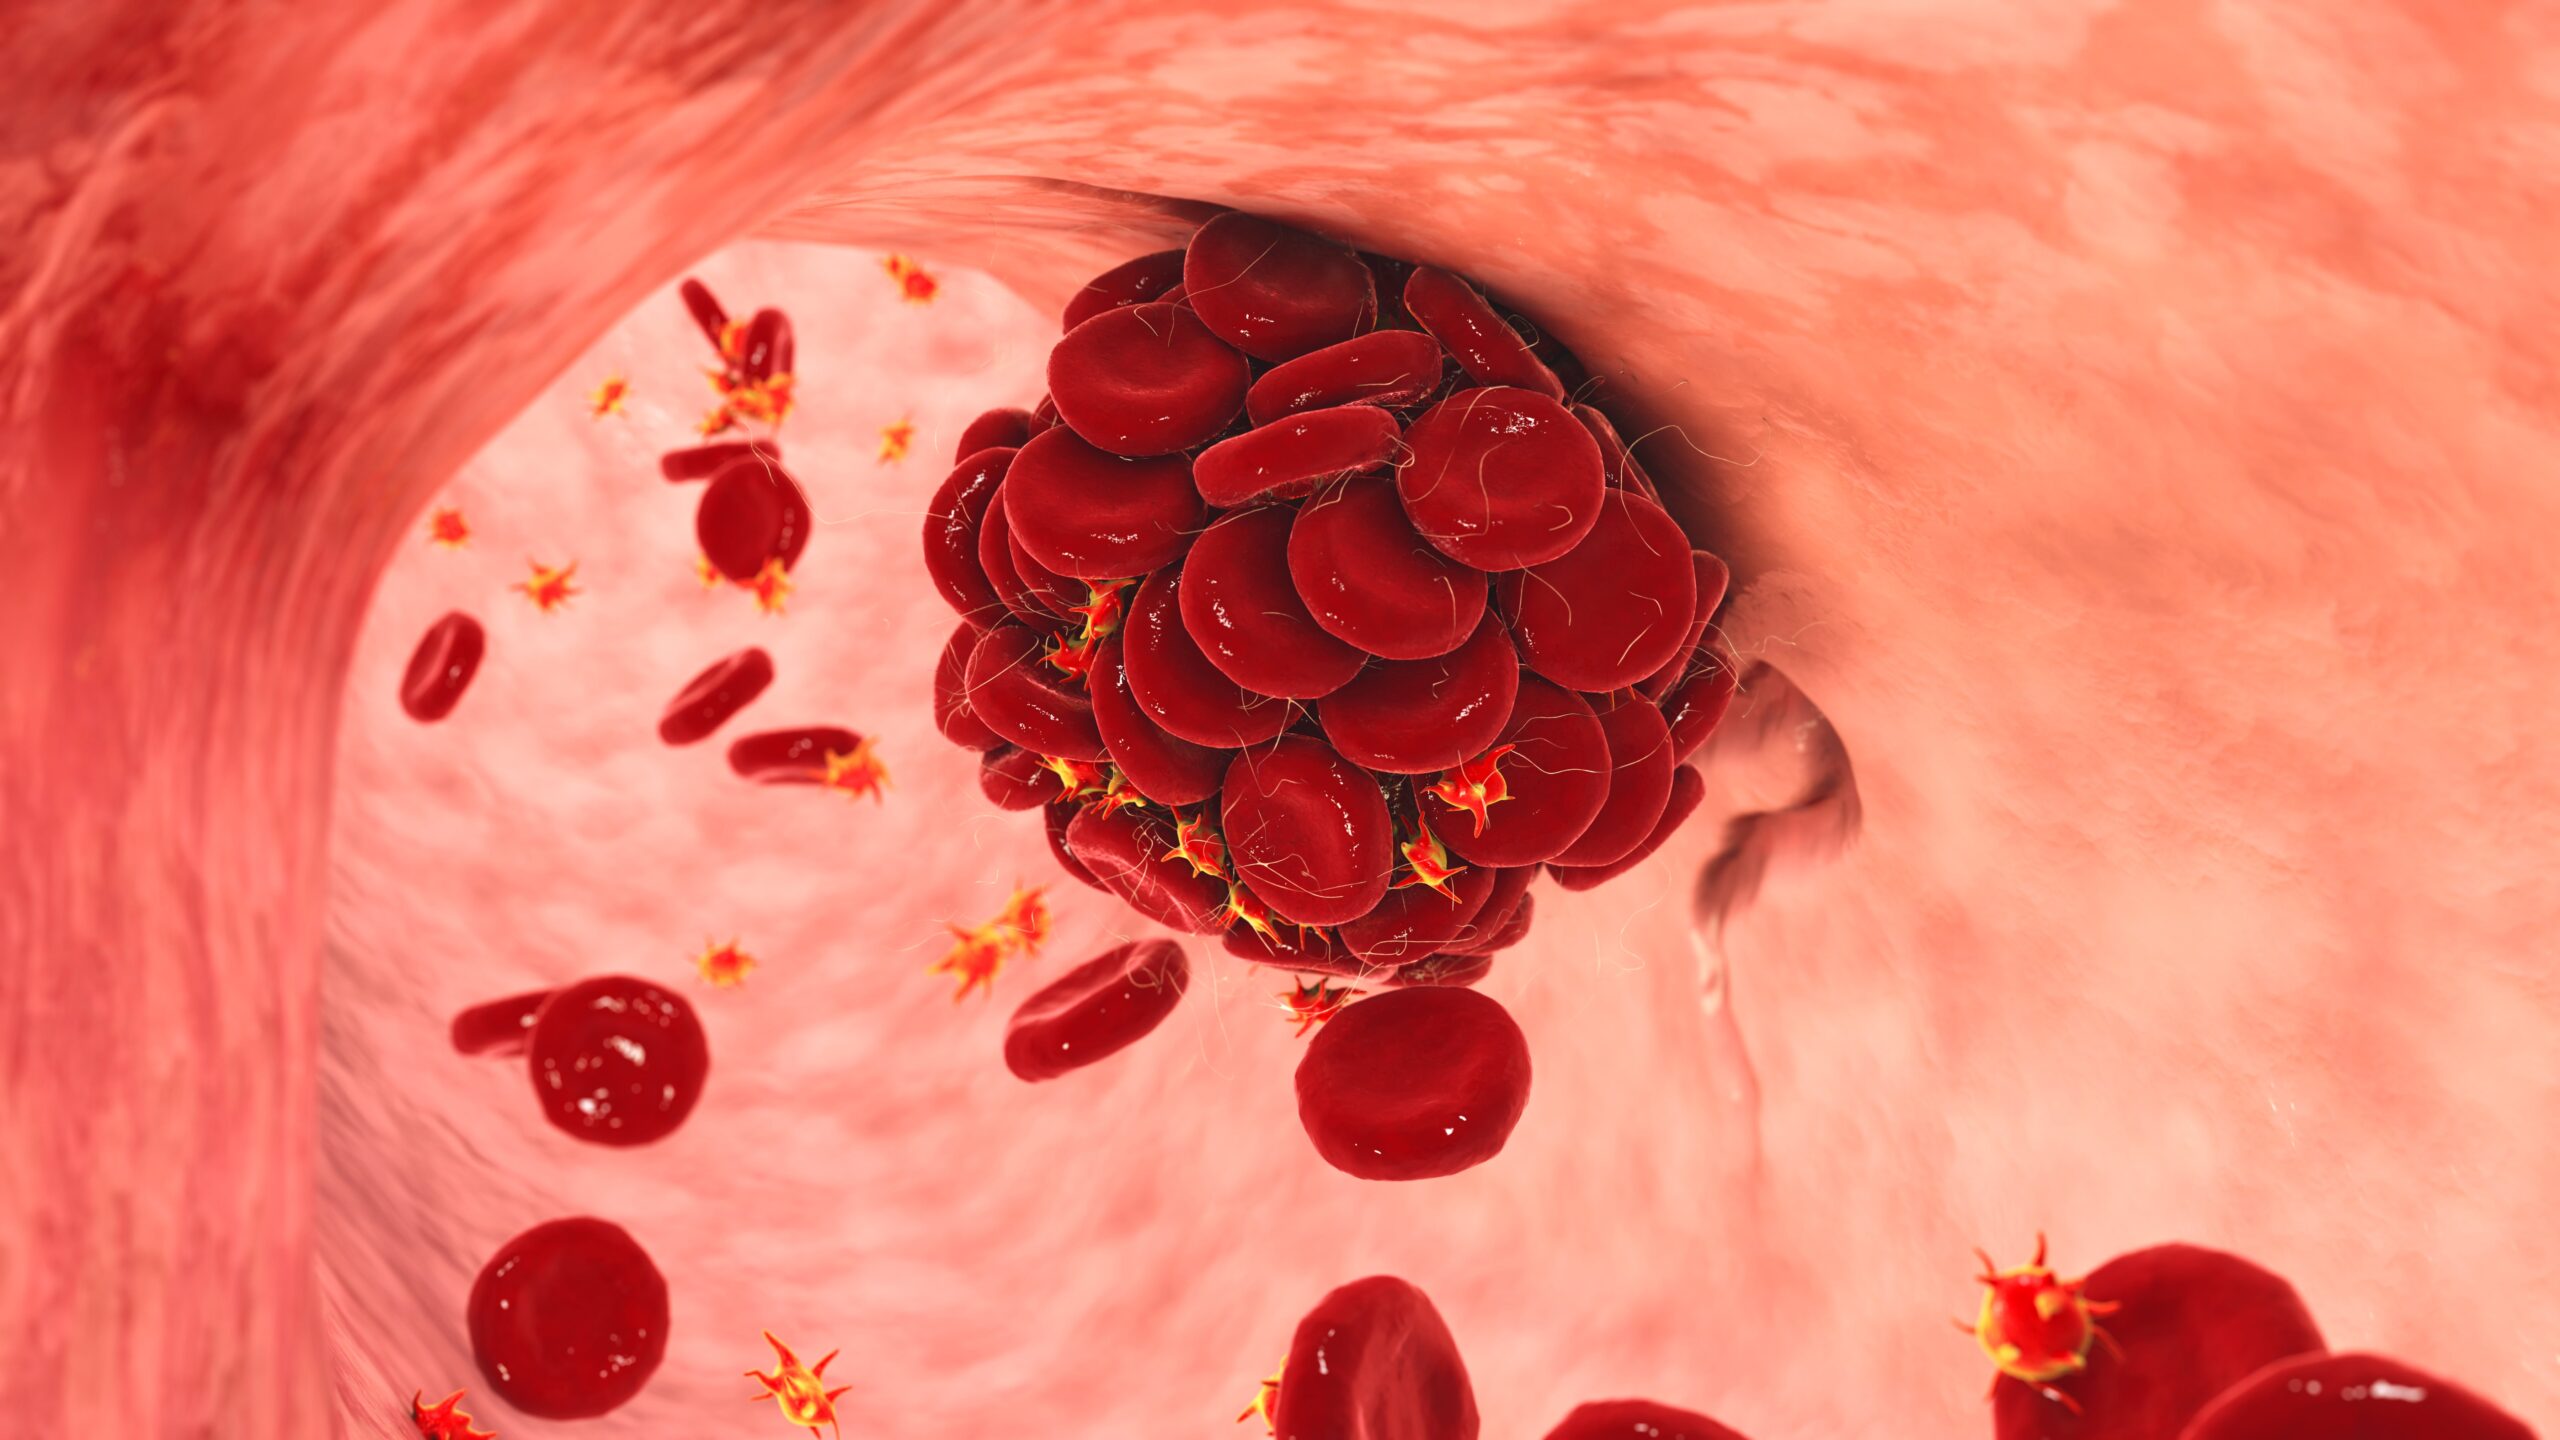 VRd Associated with Lower Thromboembolic Risk Versus KRd in Myeloma